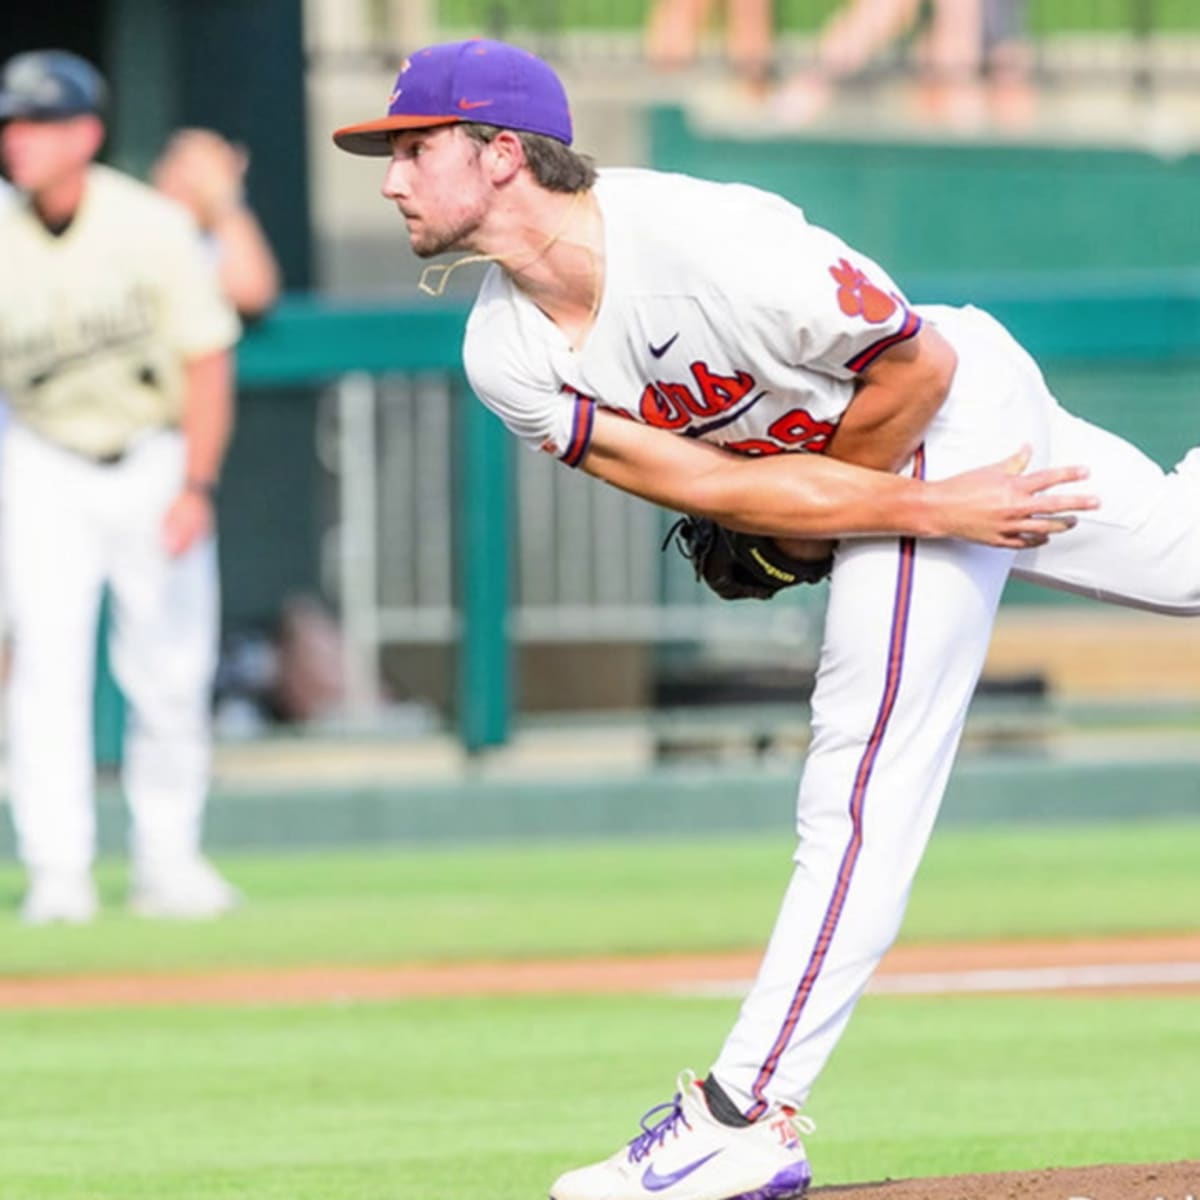 Clemson pitcher Spencer Strider to have Tommy John surgery right